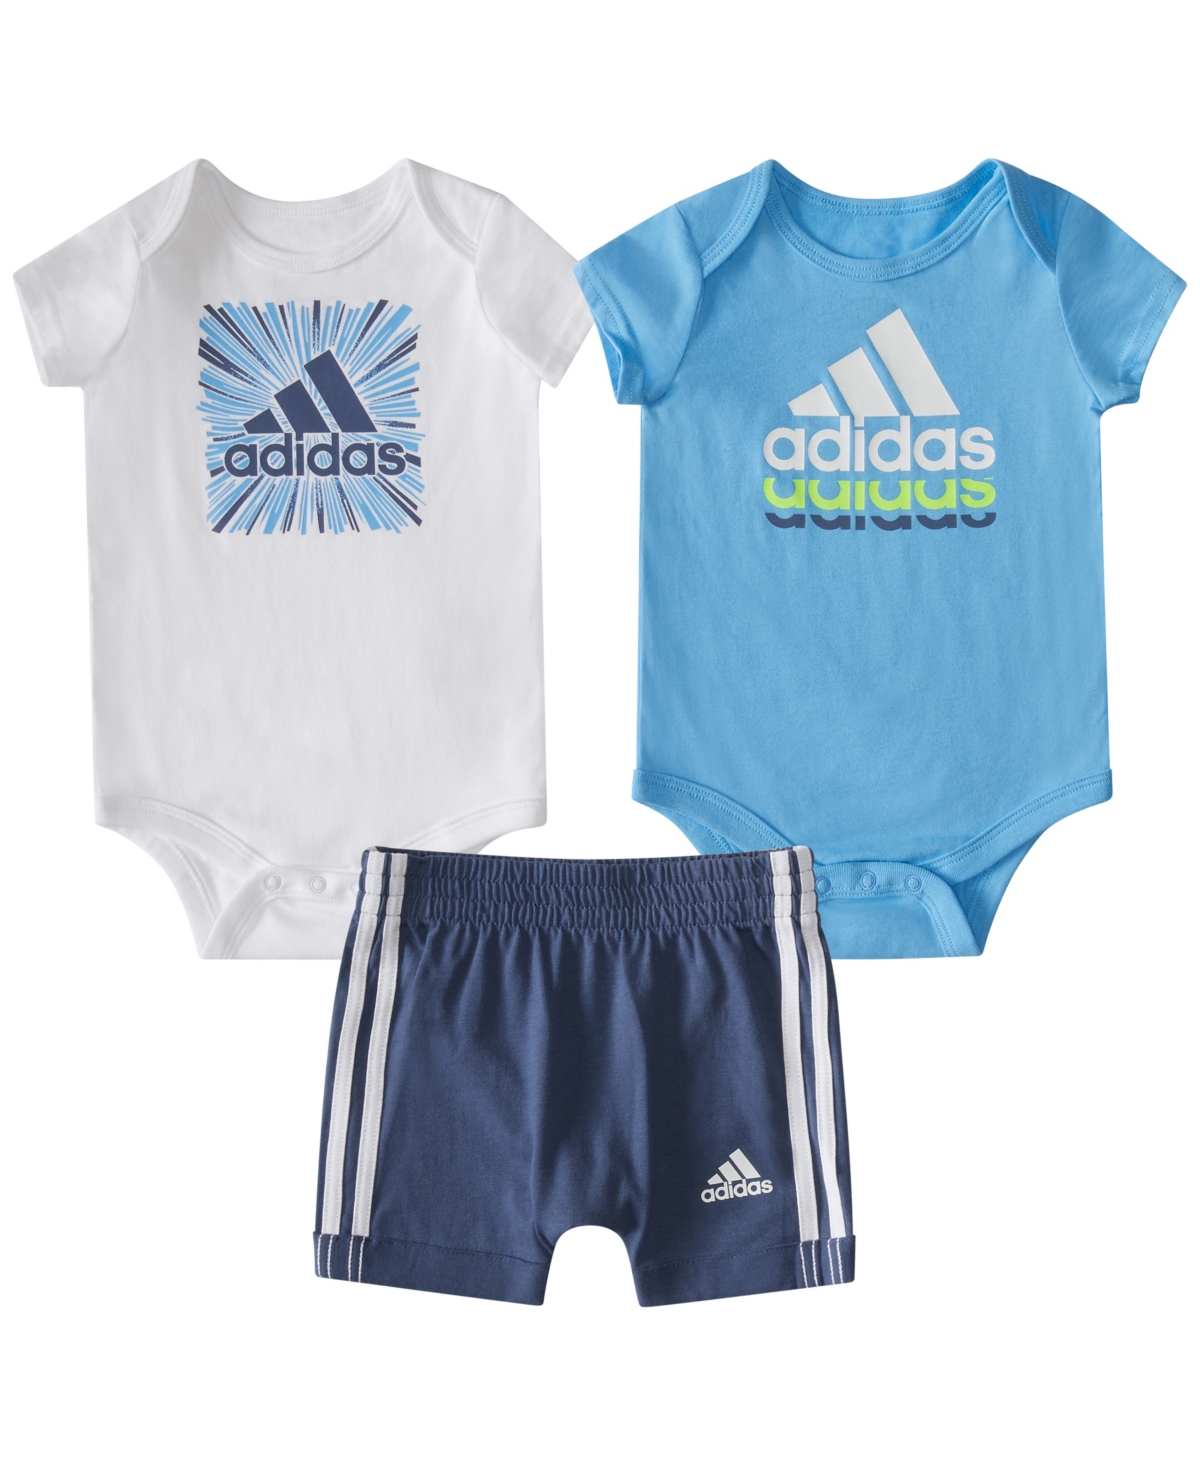 Adidas Originals Baby Boys Logo Bodysuits And Shorts, 3 Piece Set In Blue With White